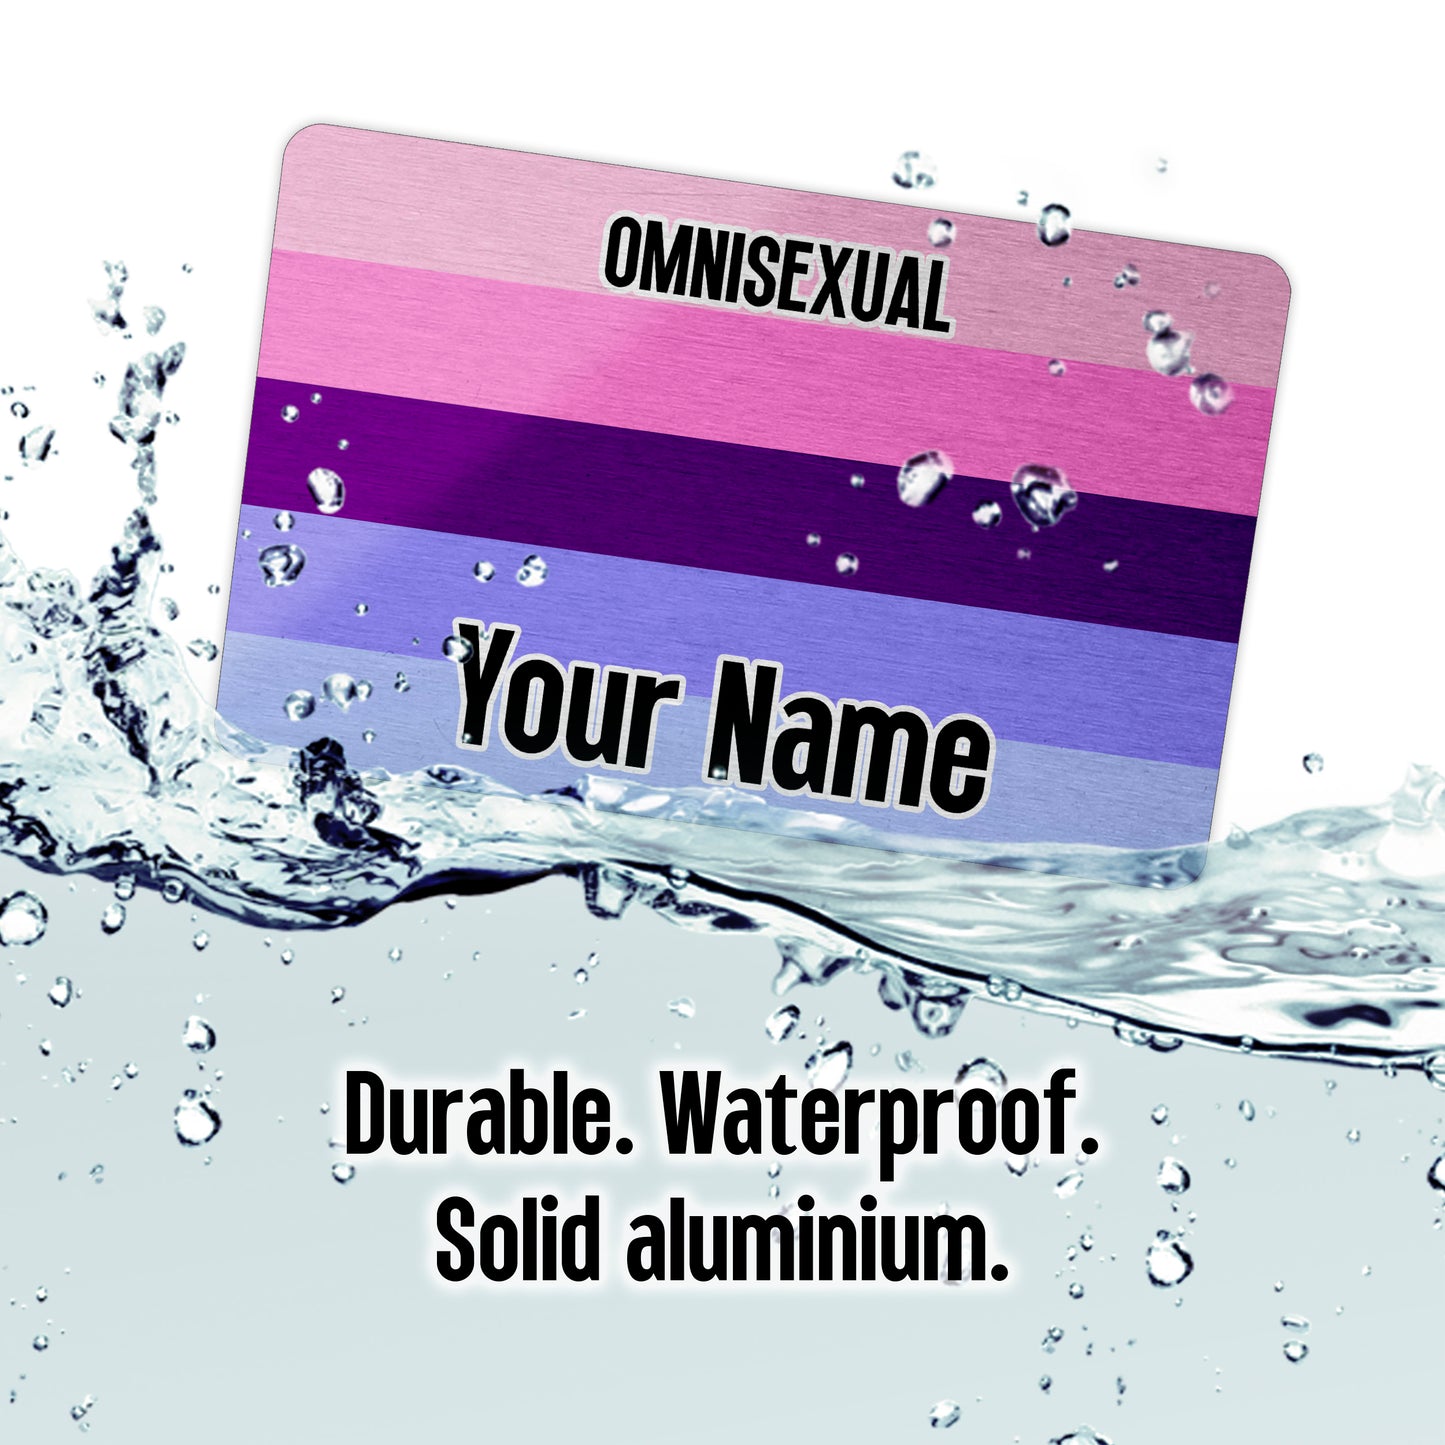 Aluminium wallet card personalised with your name and the omnisexual pride flag